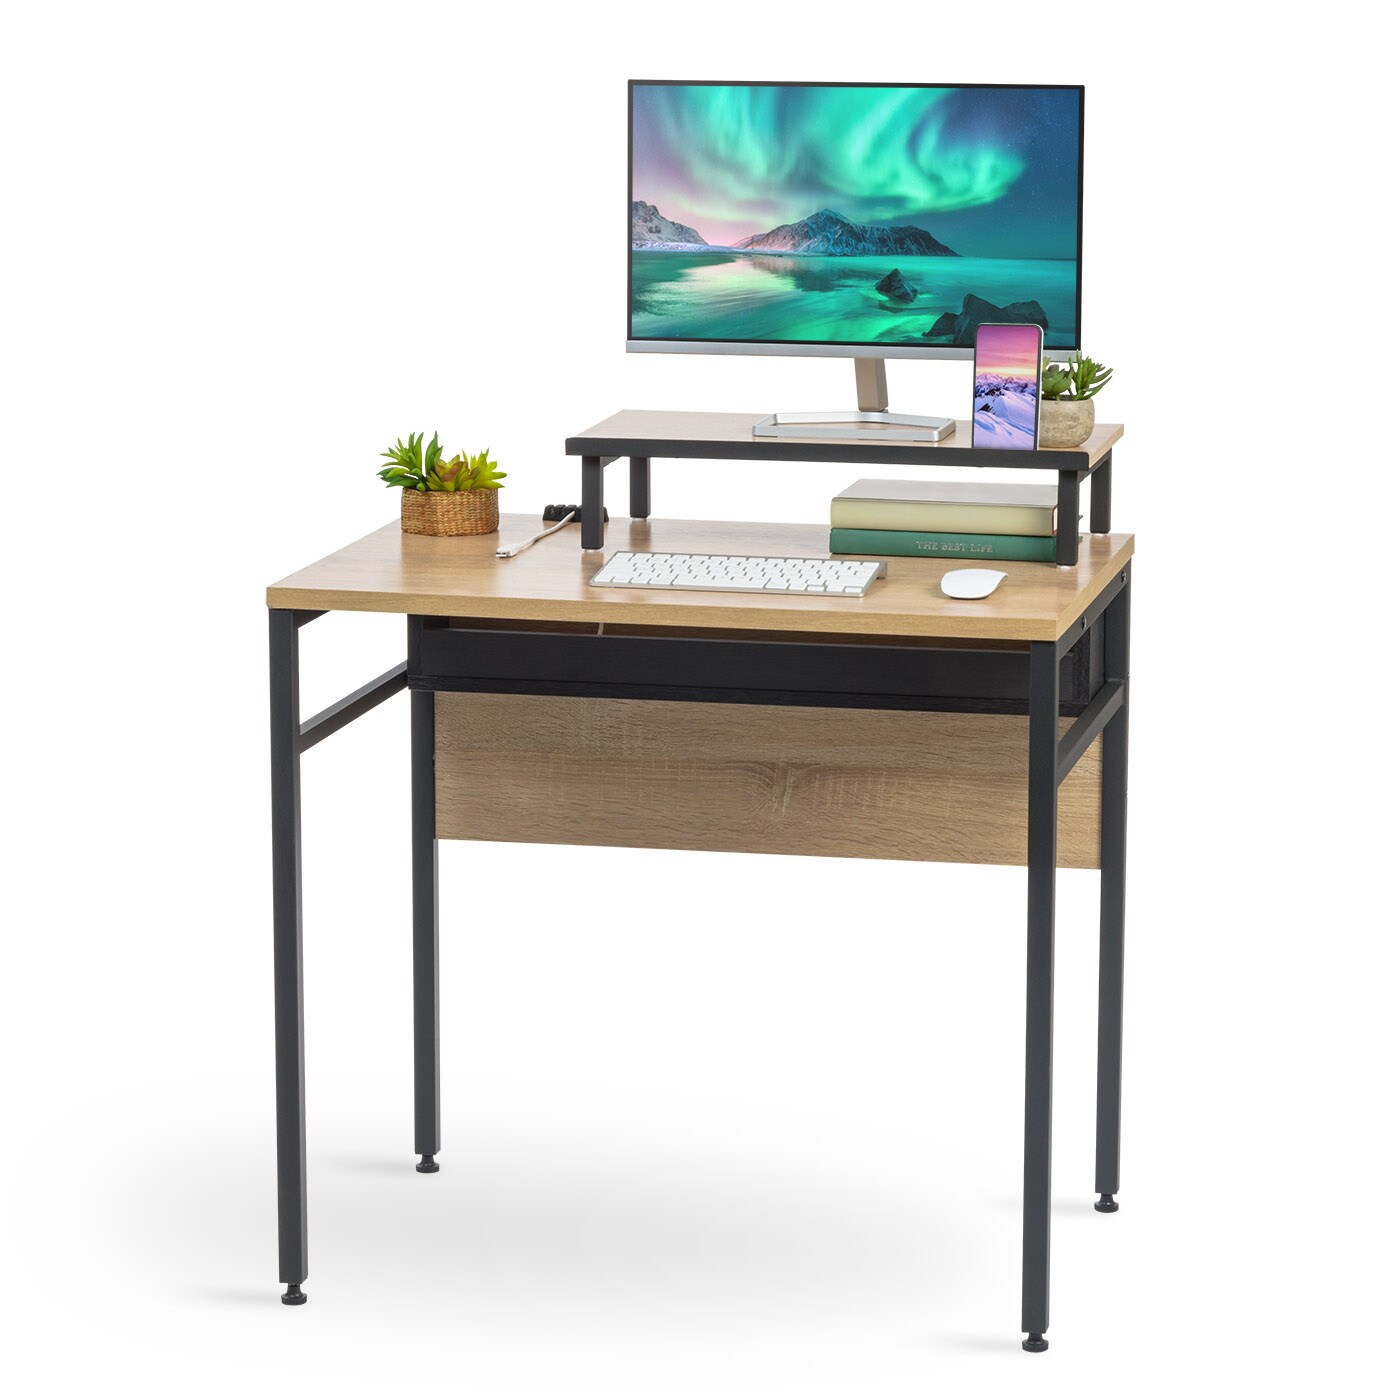 IRIS USA Office Computer Desk Table with Organizer and Cable Tray